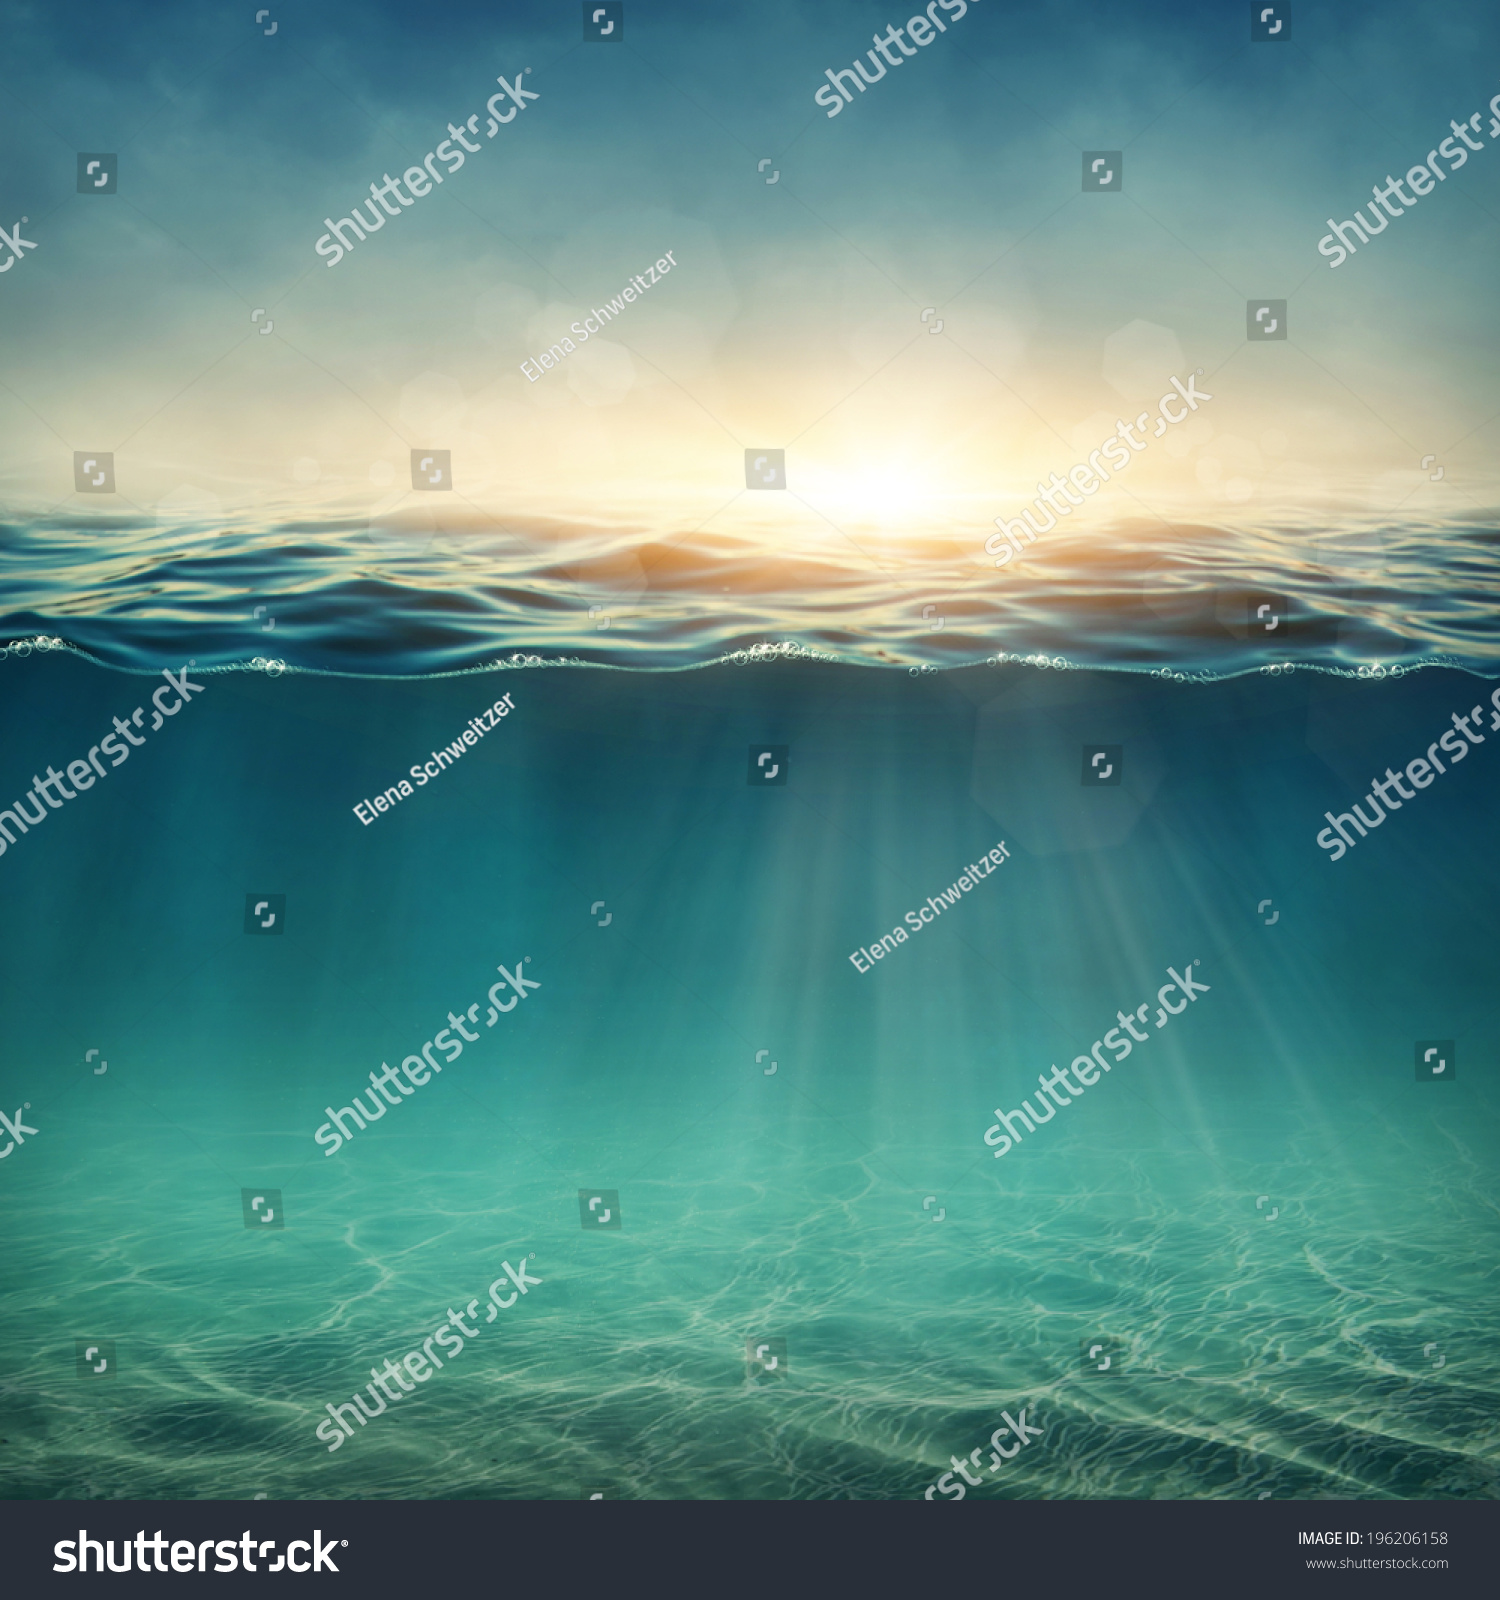 Abstract underwater background with sunbeams #196206158